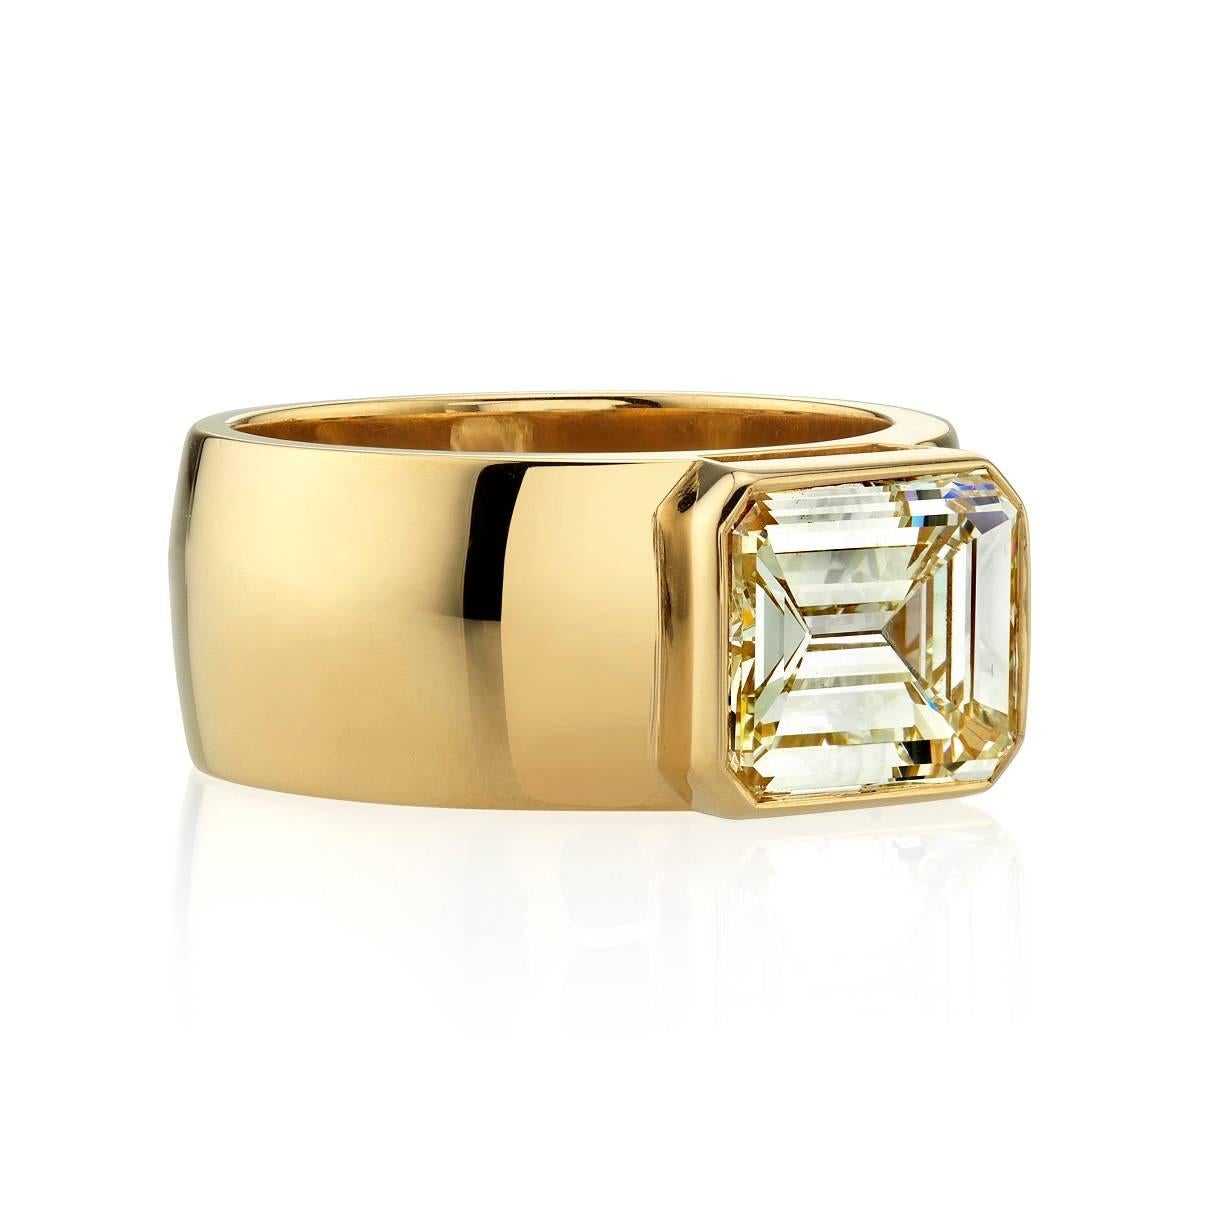 3.39ct L/VS1 GIA certified Emerald cut diamond set in a handcrafted 18k yellow gold mounting. A bold and sleek design. 